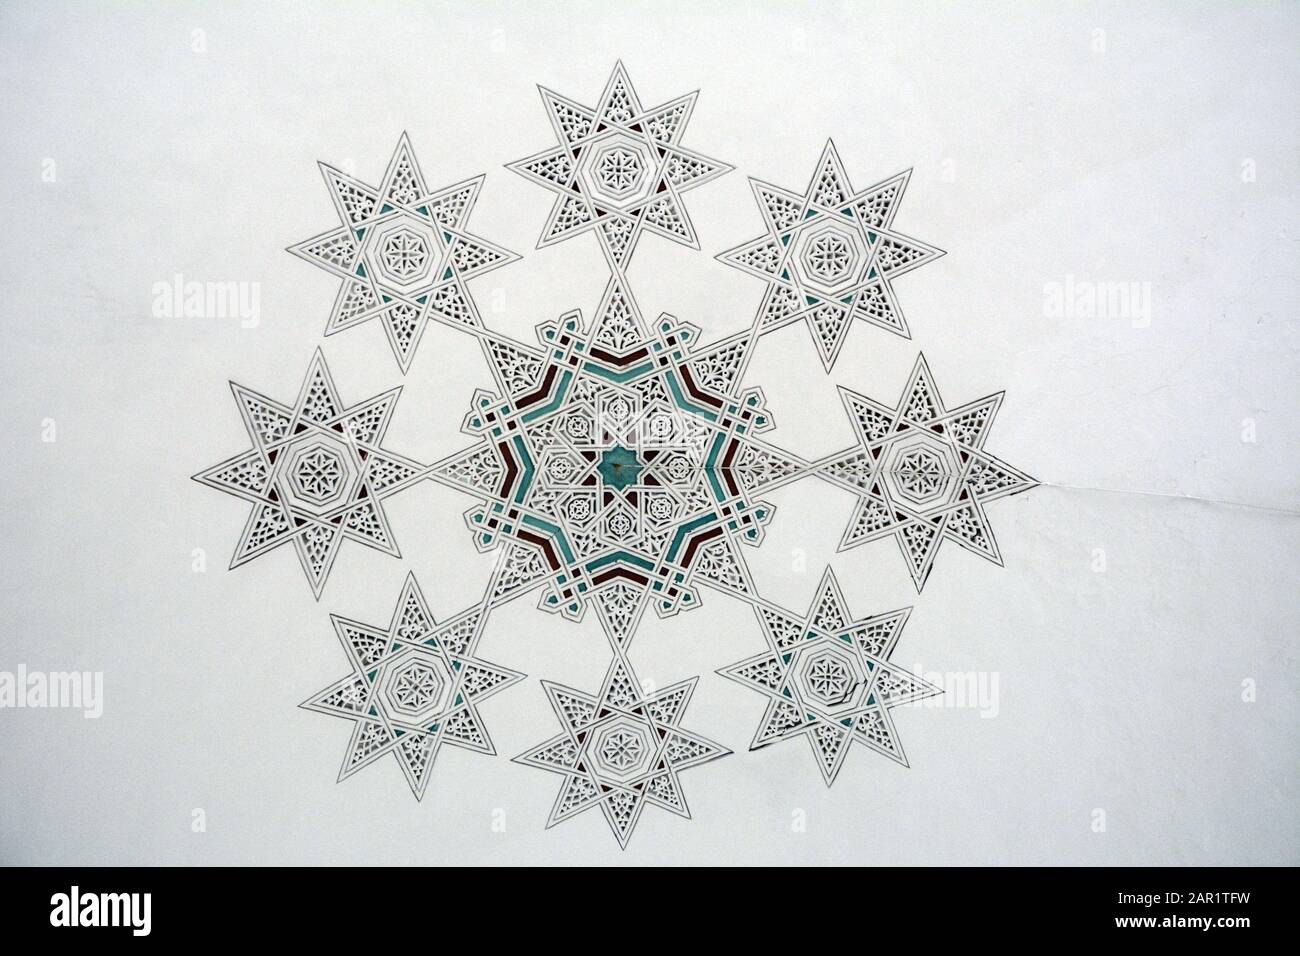 18th century Islamic geometrical home ceiling designs in sculpted plaster stucco known as Naqsh-hadida, in the Bardo Museum in Tunis, Tunisia. Stock Photo